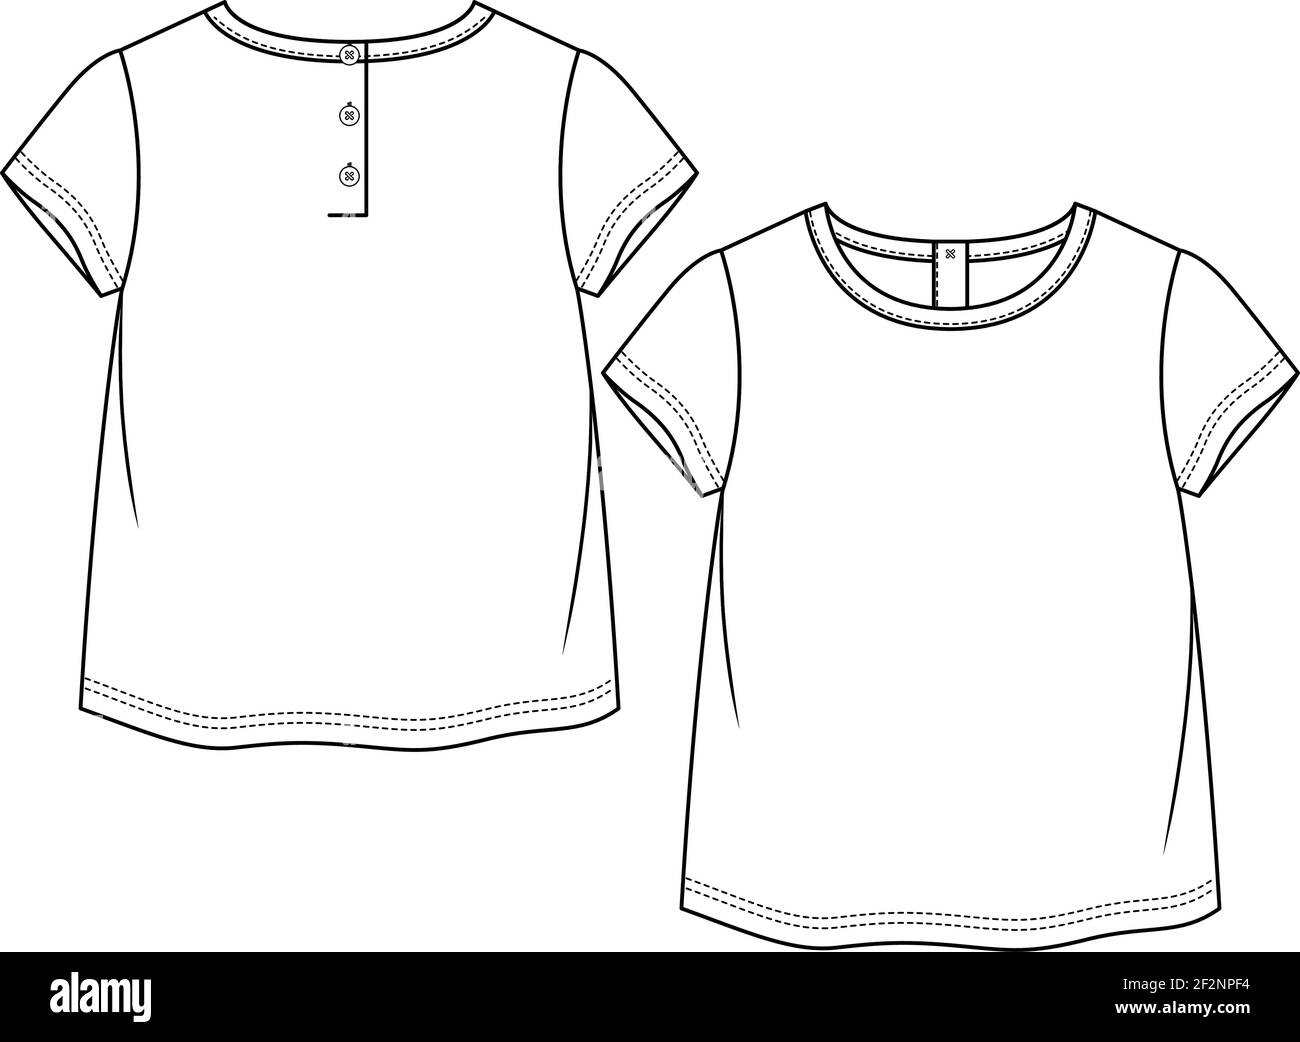 Tshirt technical Sketch fashion Flat Template With Round neckline elbow  sleeves oversized tunic length Cotton jersey Vector illustration basic  apparel design easy editable and customizable Stock Vector  Adobe Stock